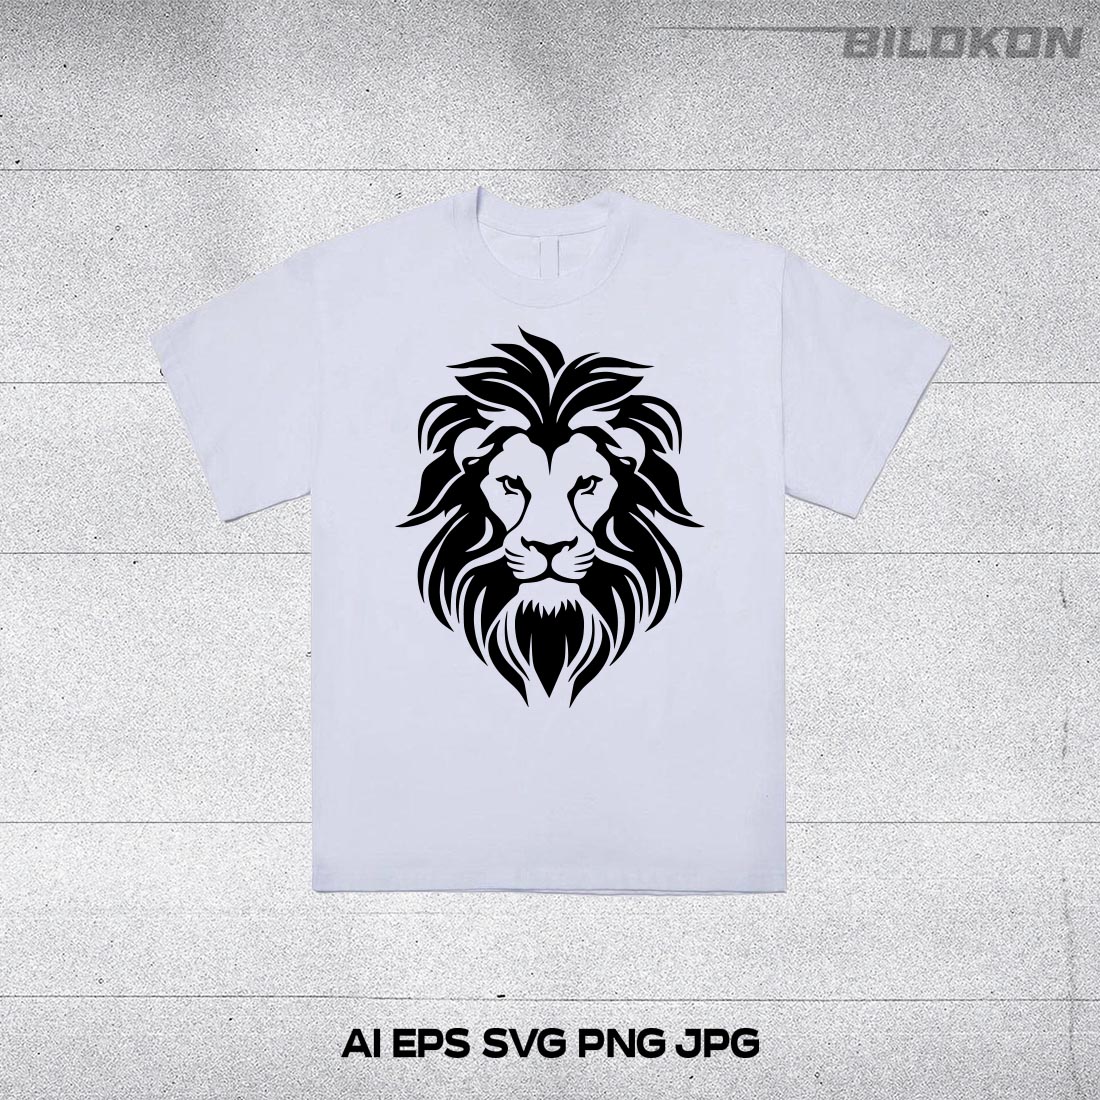 White t - shirt with a black lion's head on it.